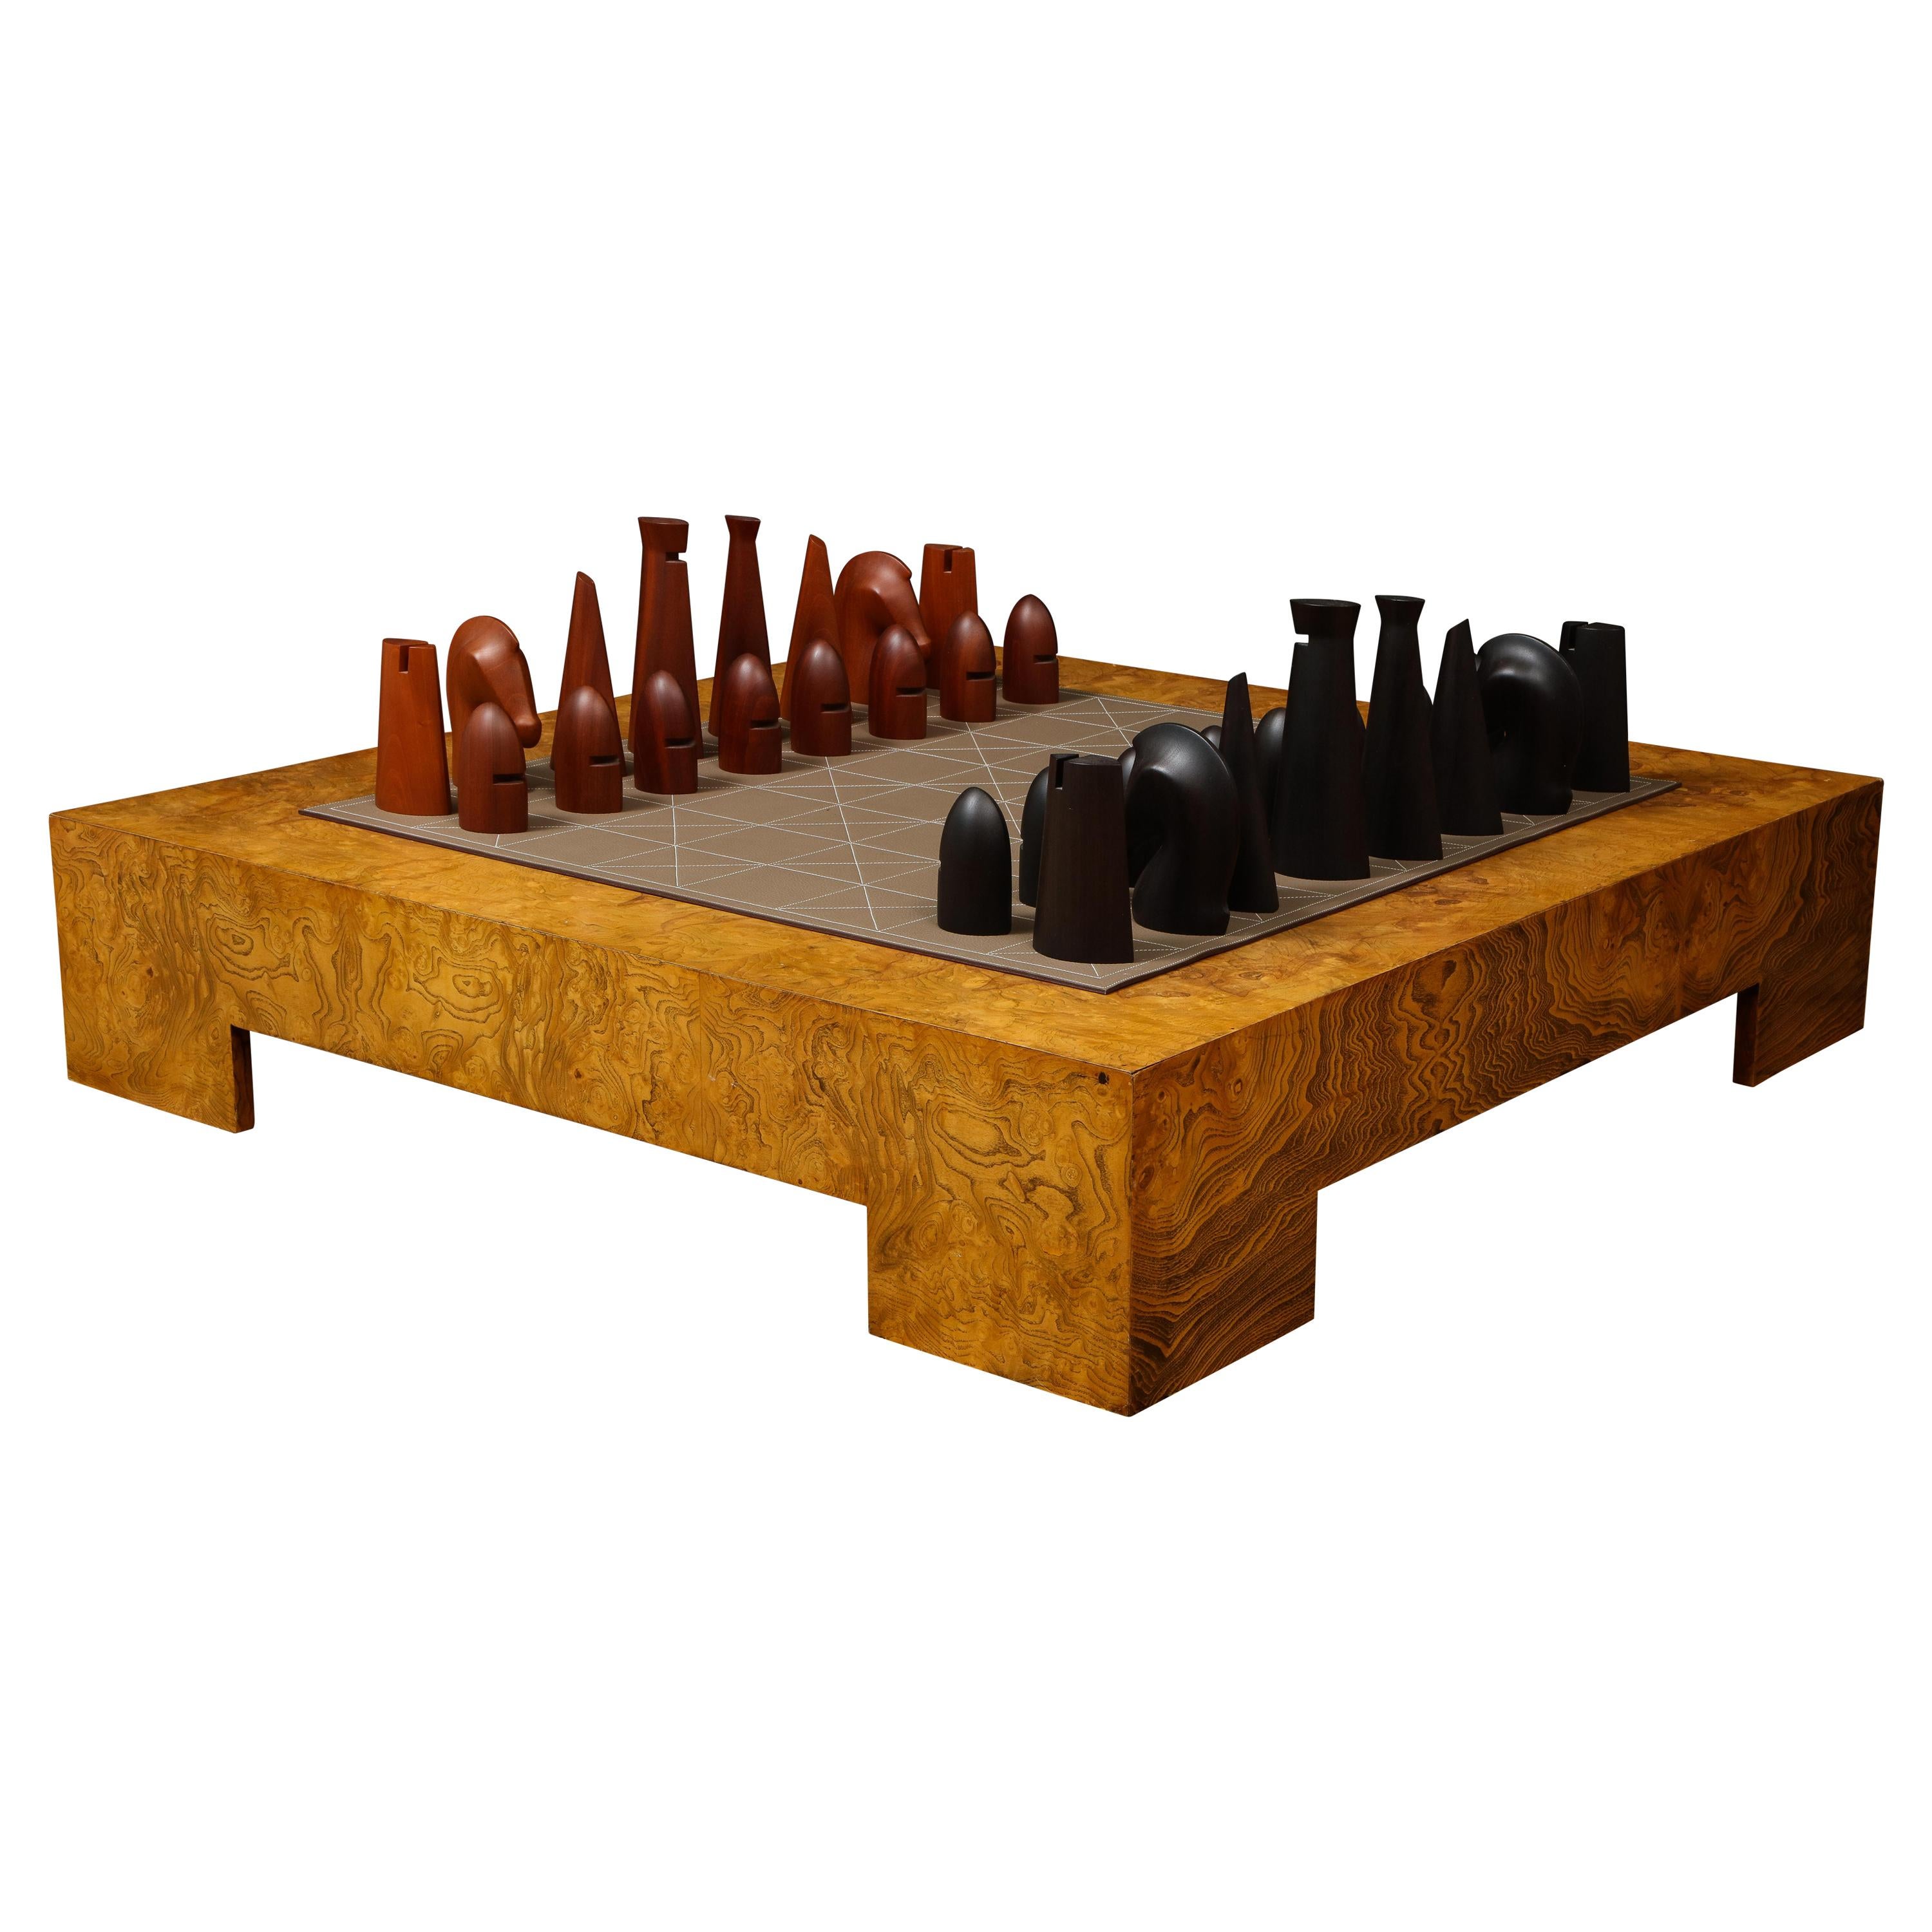 Hermes Leather and Wood Chess Set